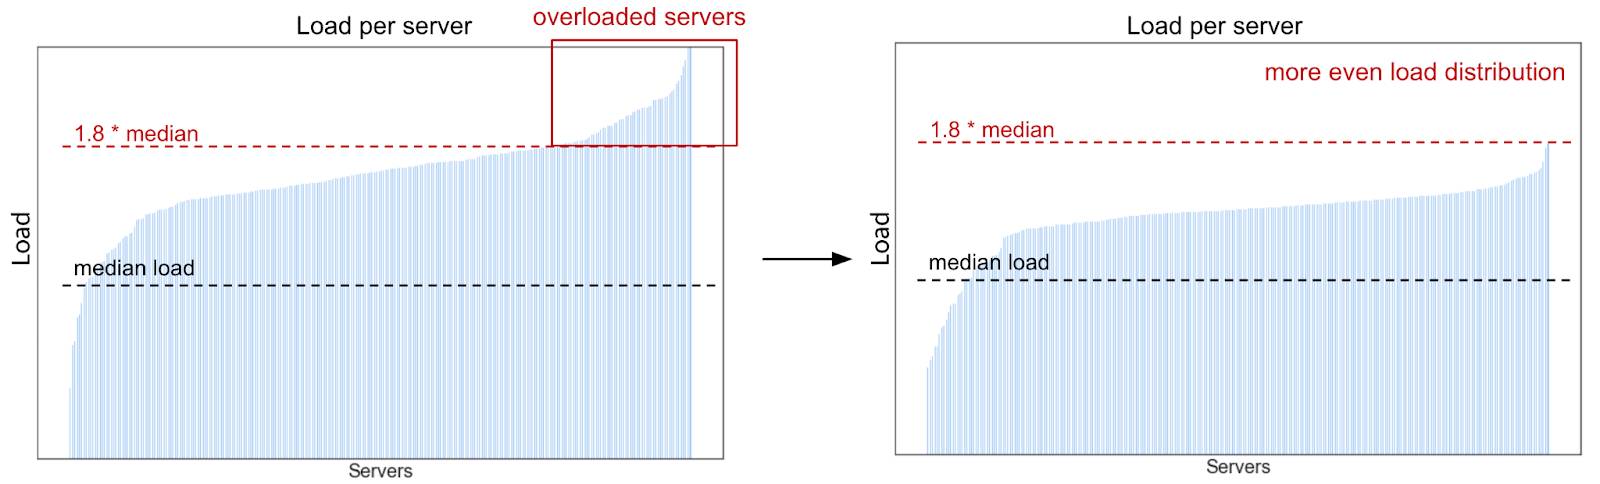 Change in load distribution with Adaptive Load Balancing